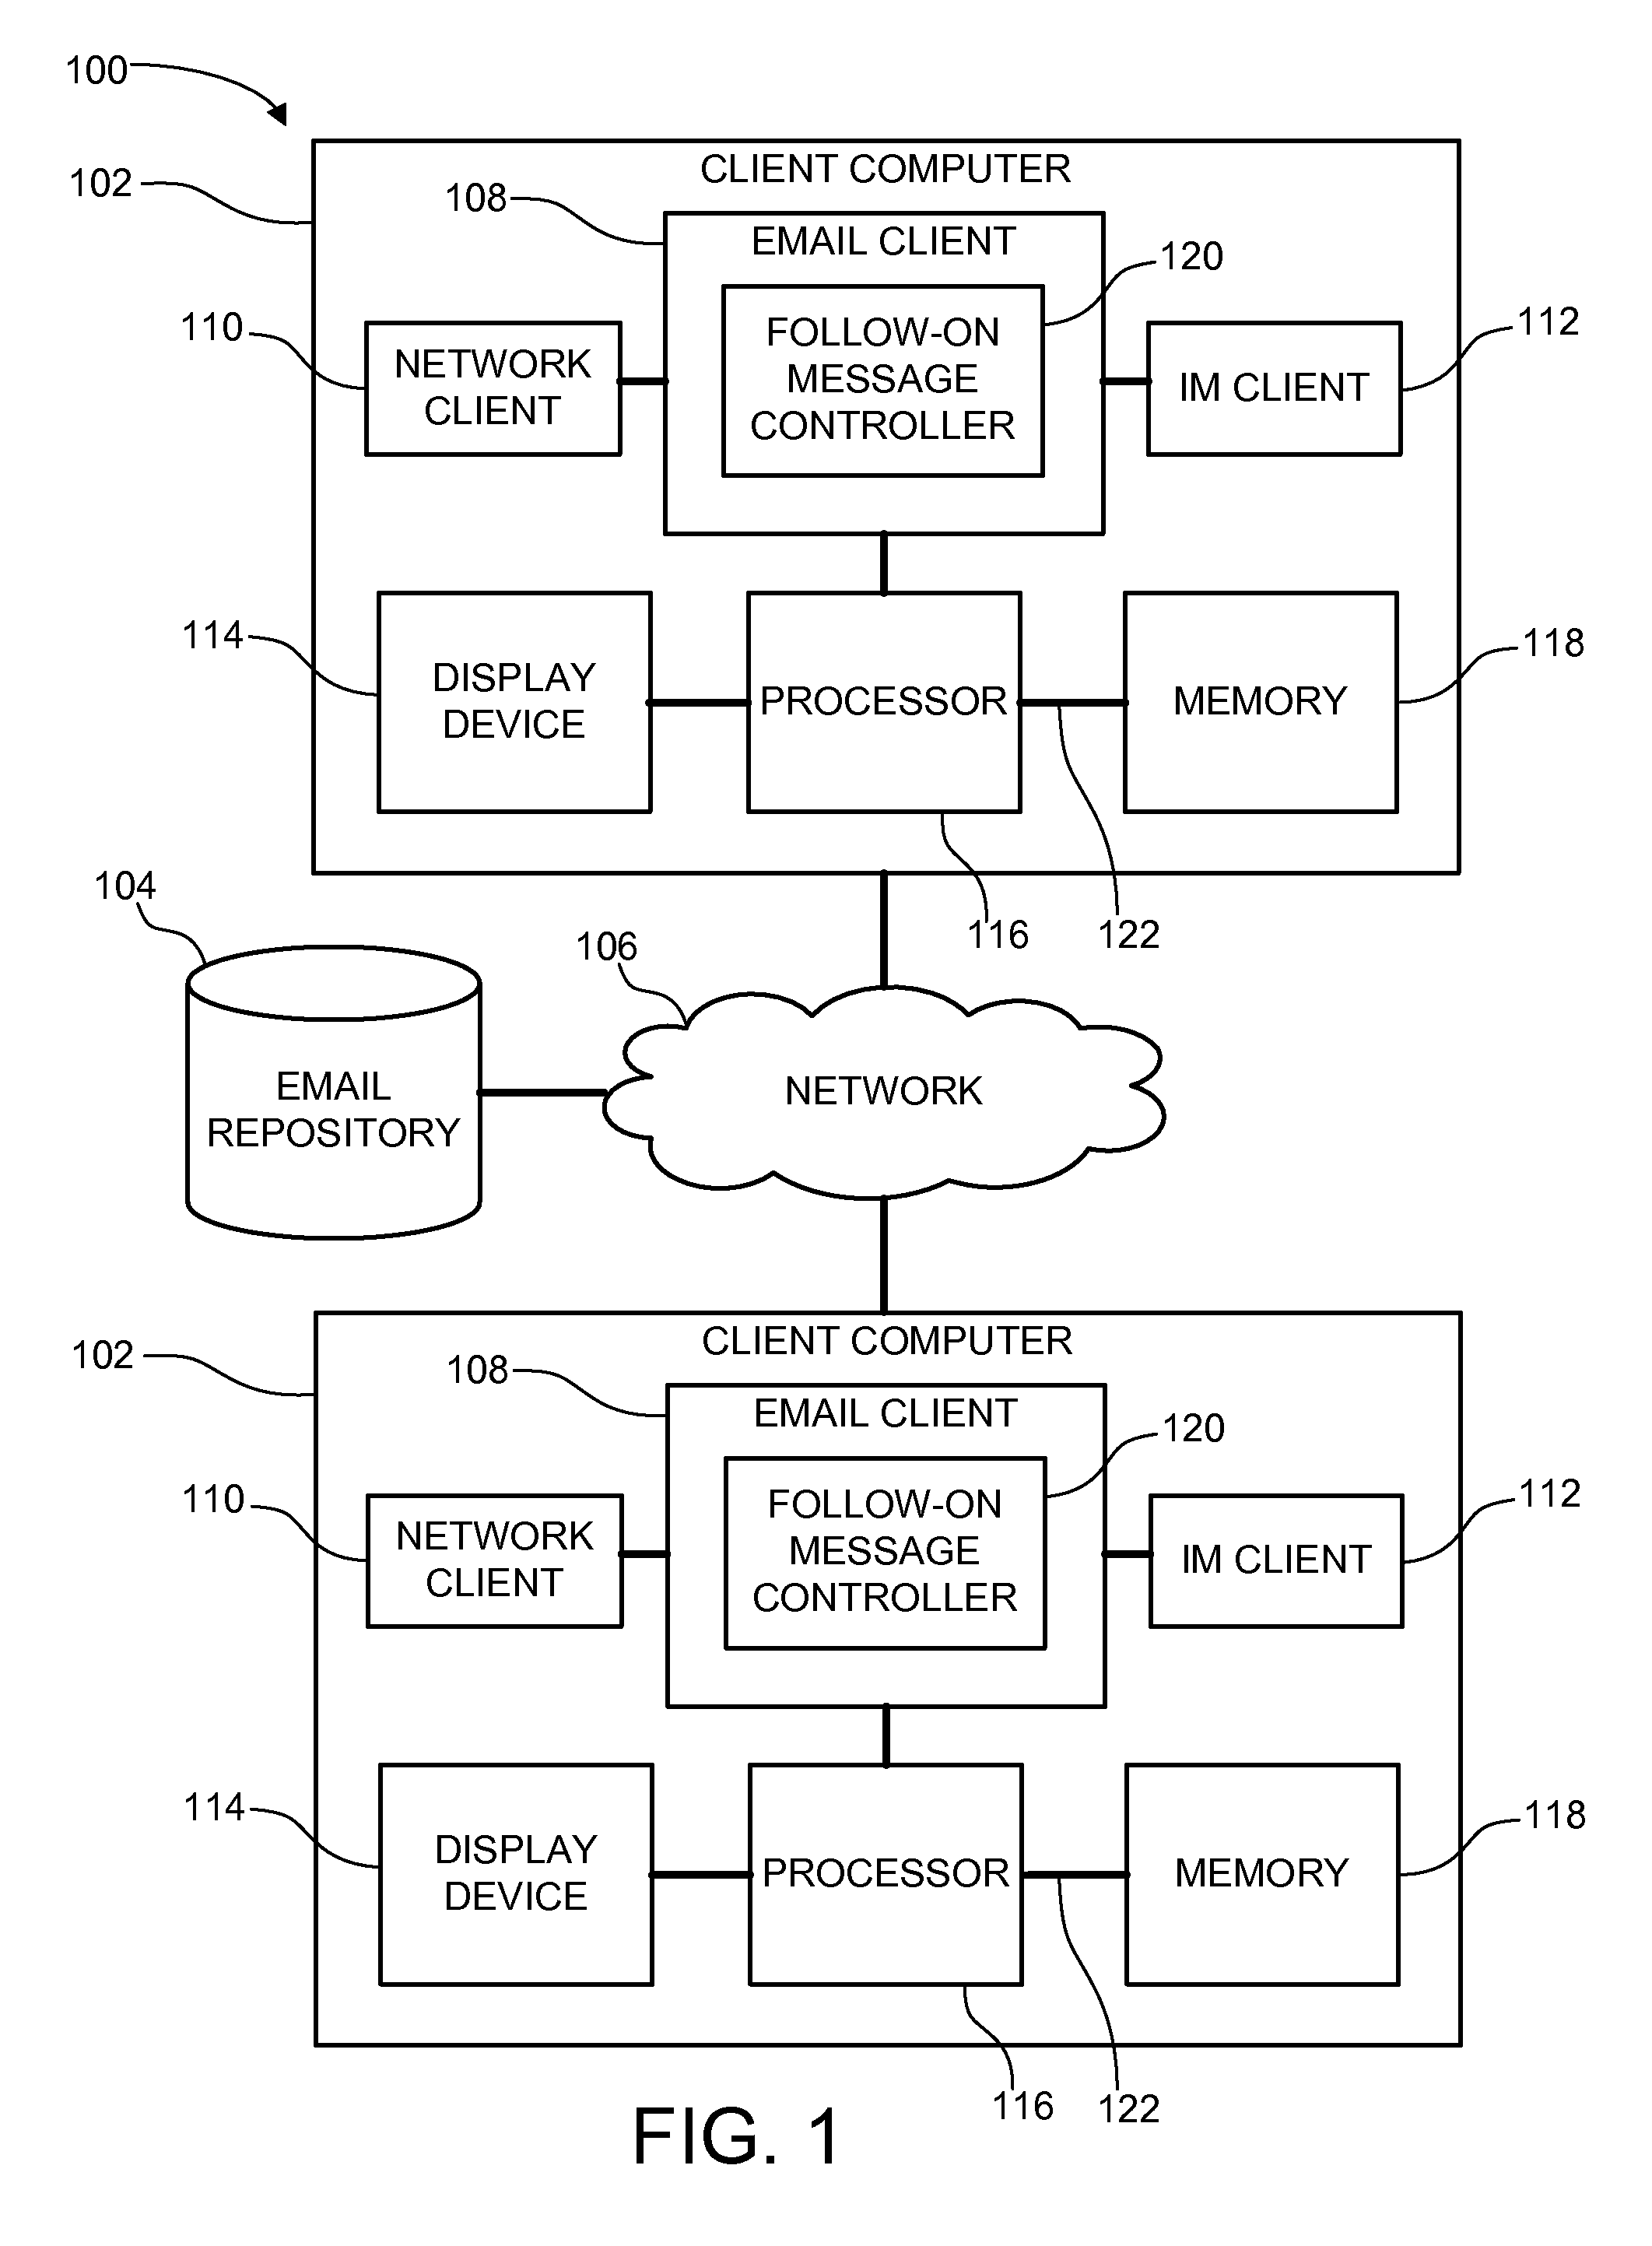 System and method for follow-on message processing